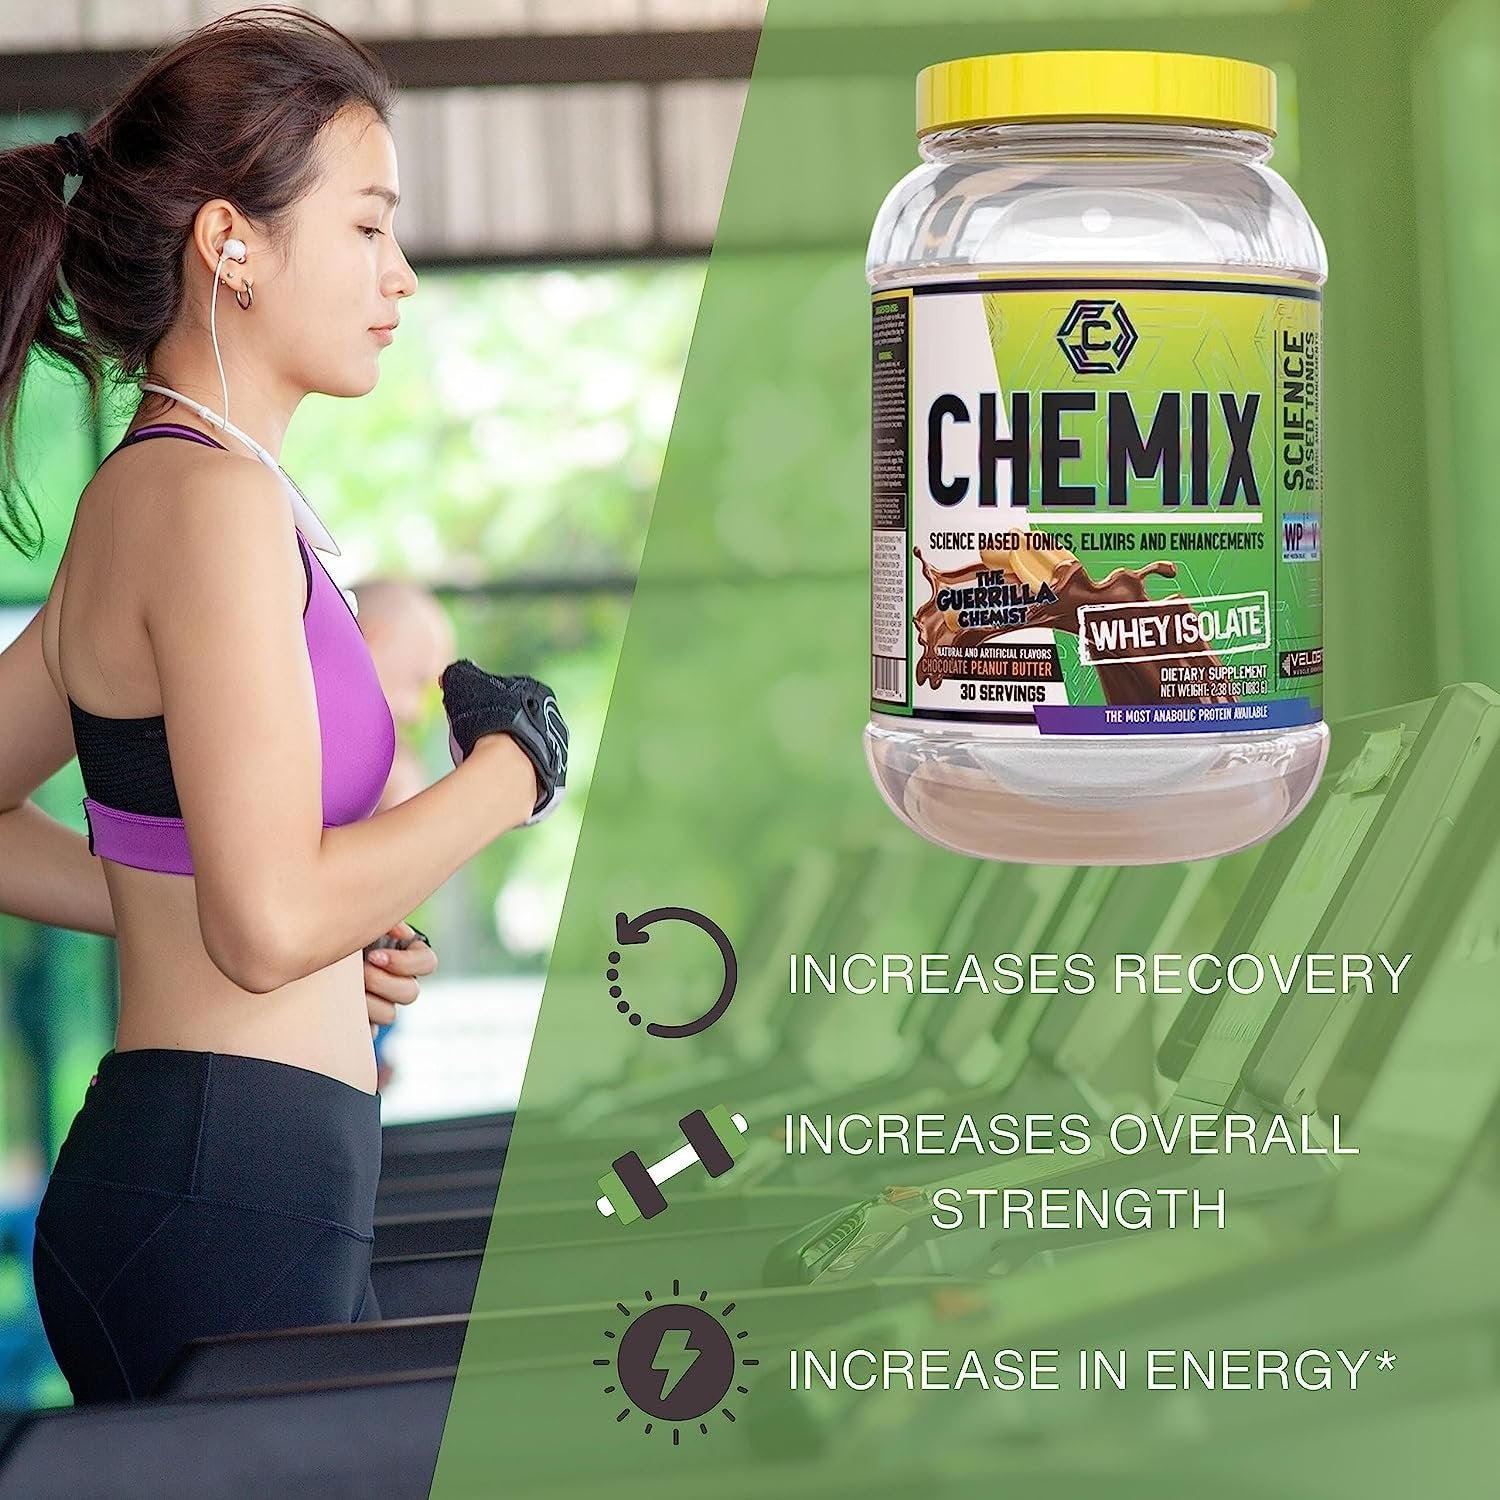 Chemix Whey Protein Isolate Chocolate Peanut Butter Flavor- Pure Whey Protein Powder 2Lb (30 Servings) - with Bonus worldwidenutrition Multi Purpose Key Chain